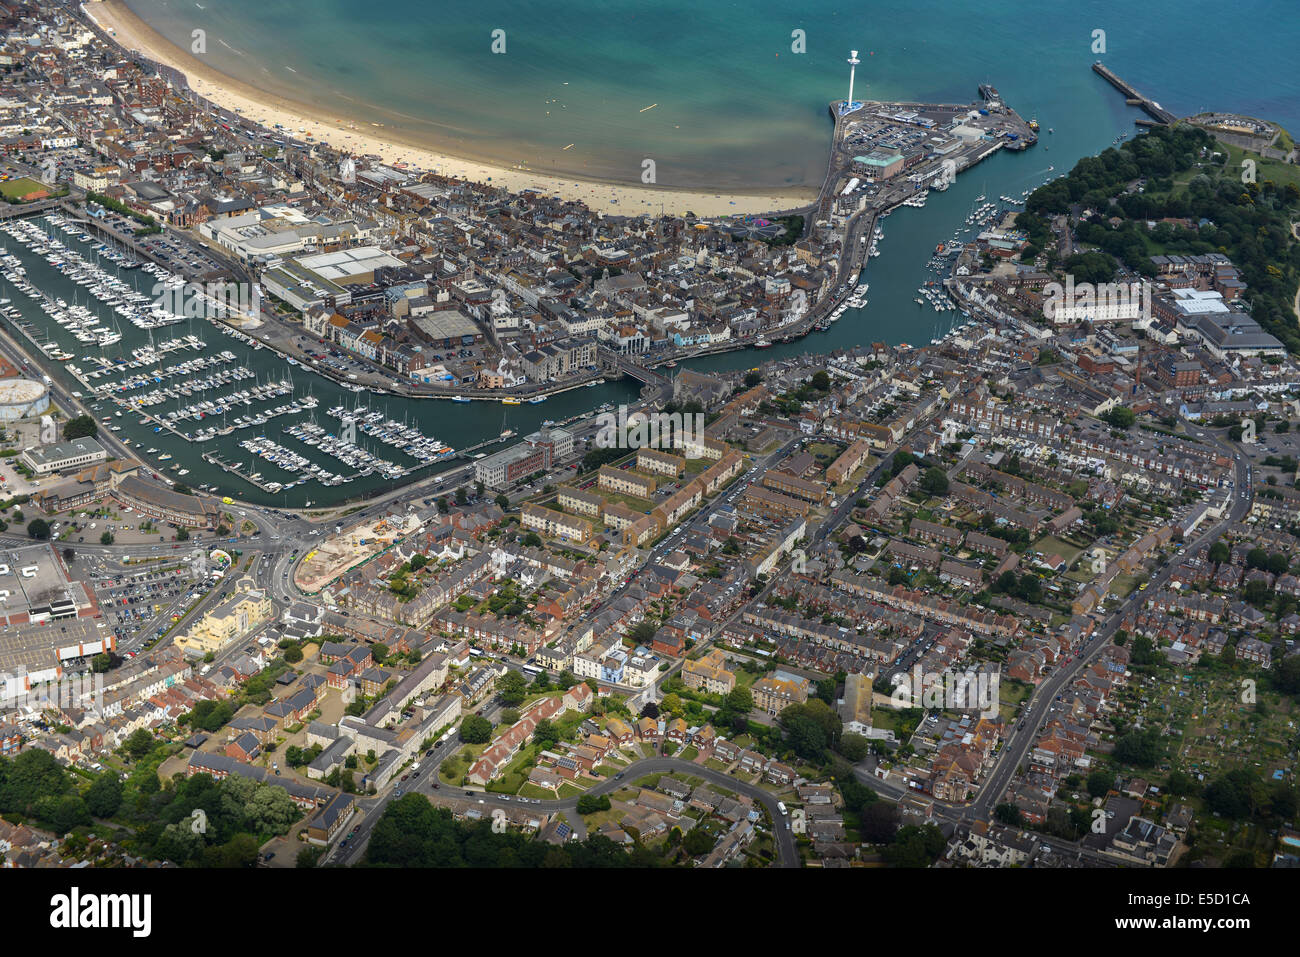 An aerial view of the Dorset town of Weymouth concentrating on the town centre and harbour area Stock Photo